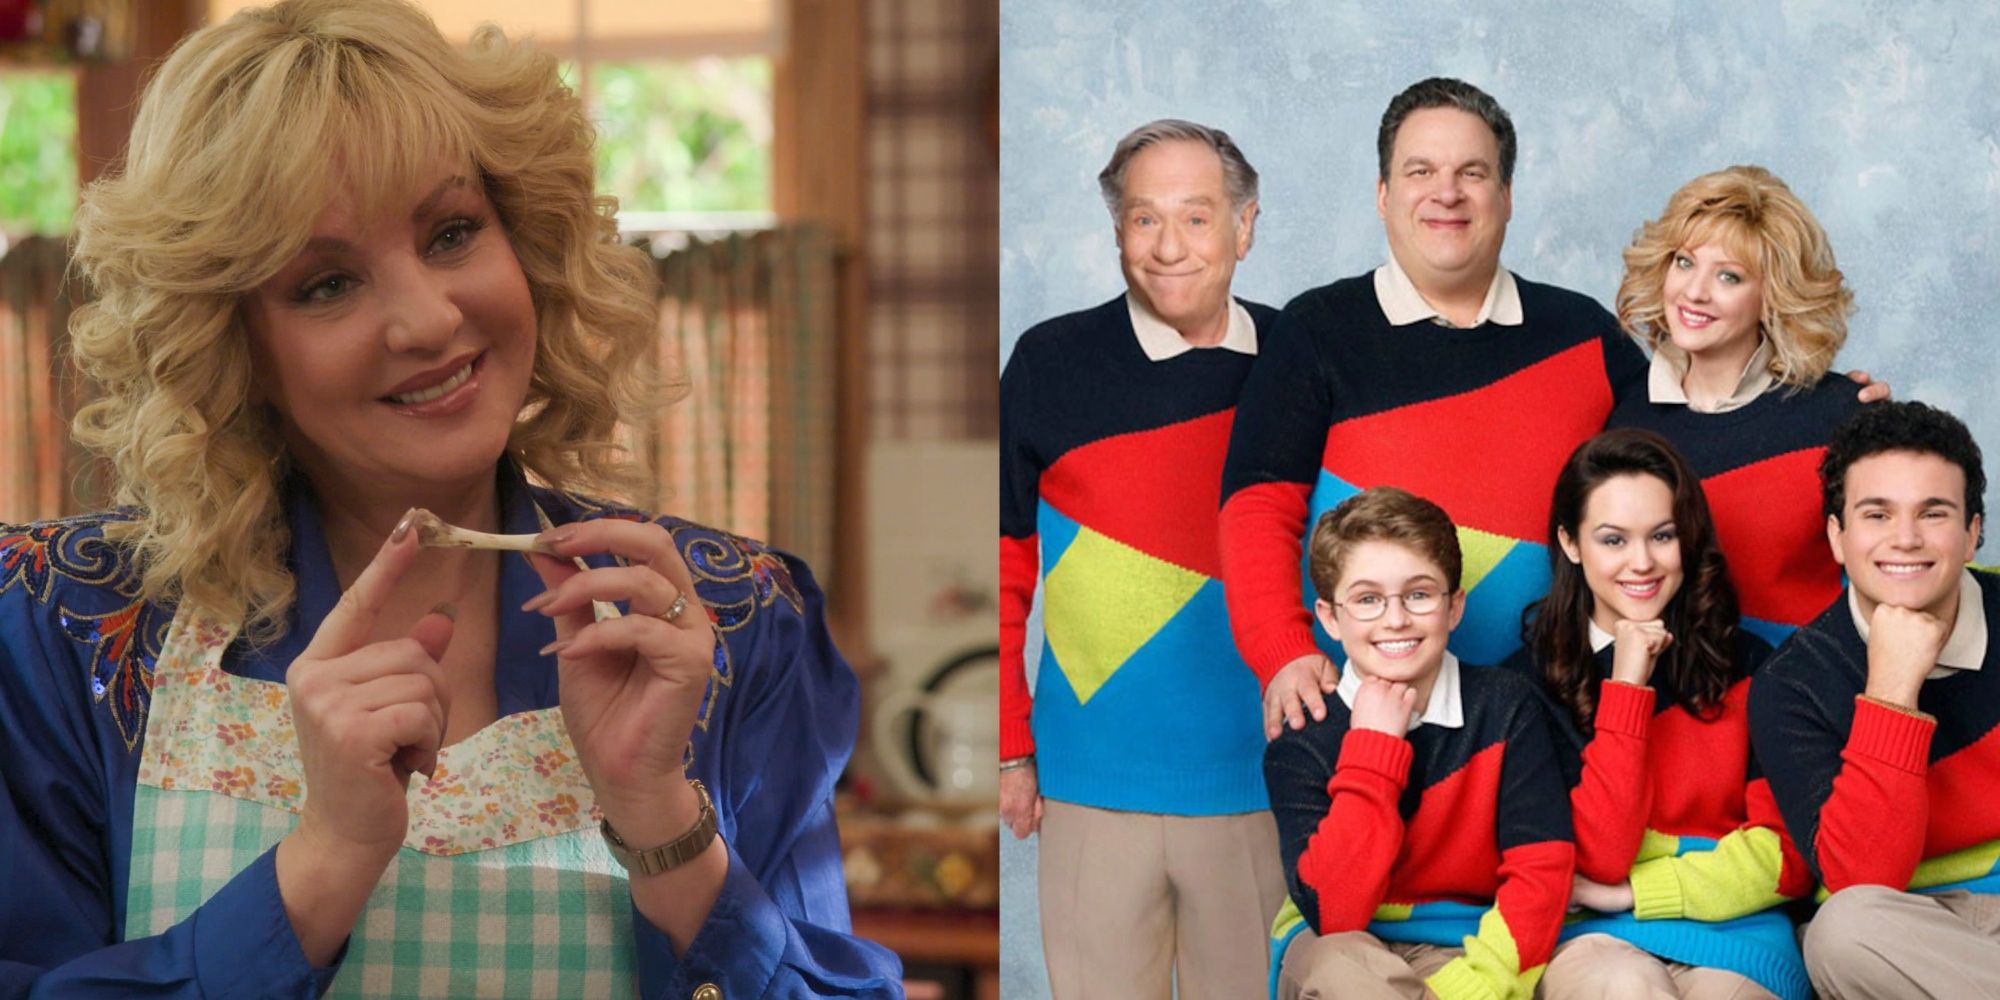 Beverly Goldberg holding a chicken bone smiling, The Goldbergs smiling in matching sweaters